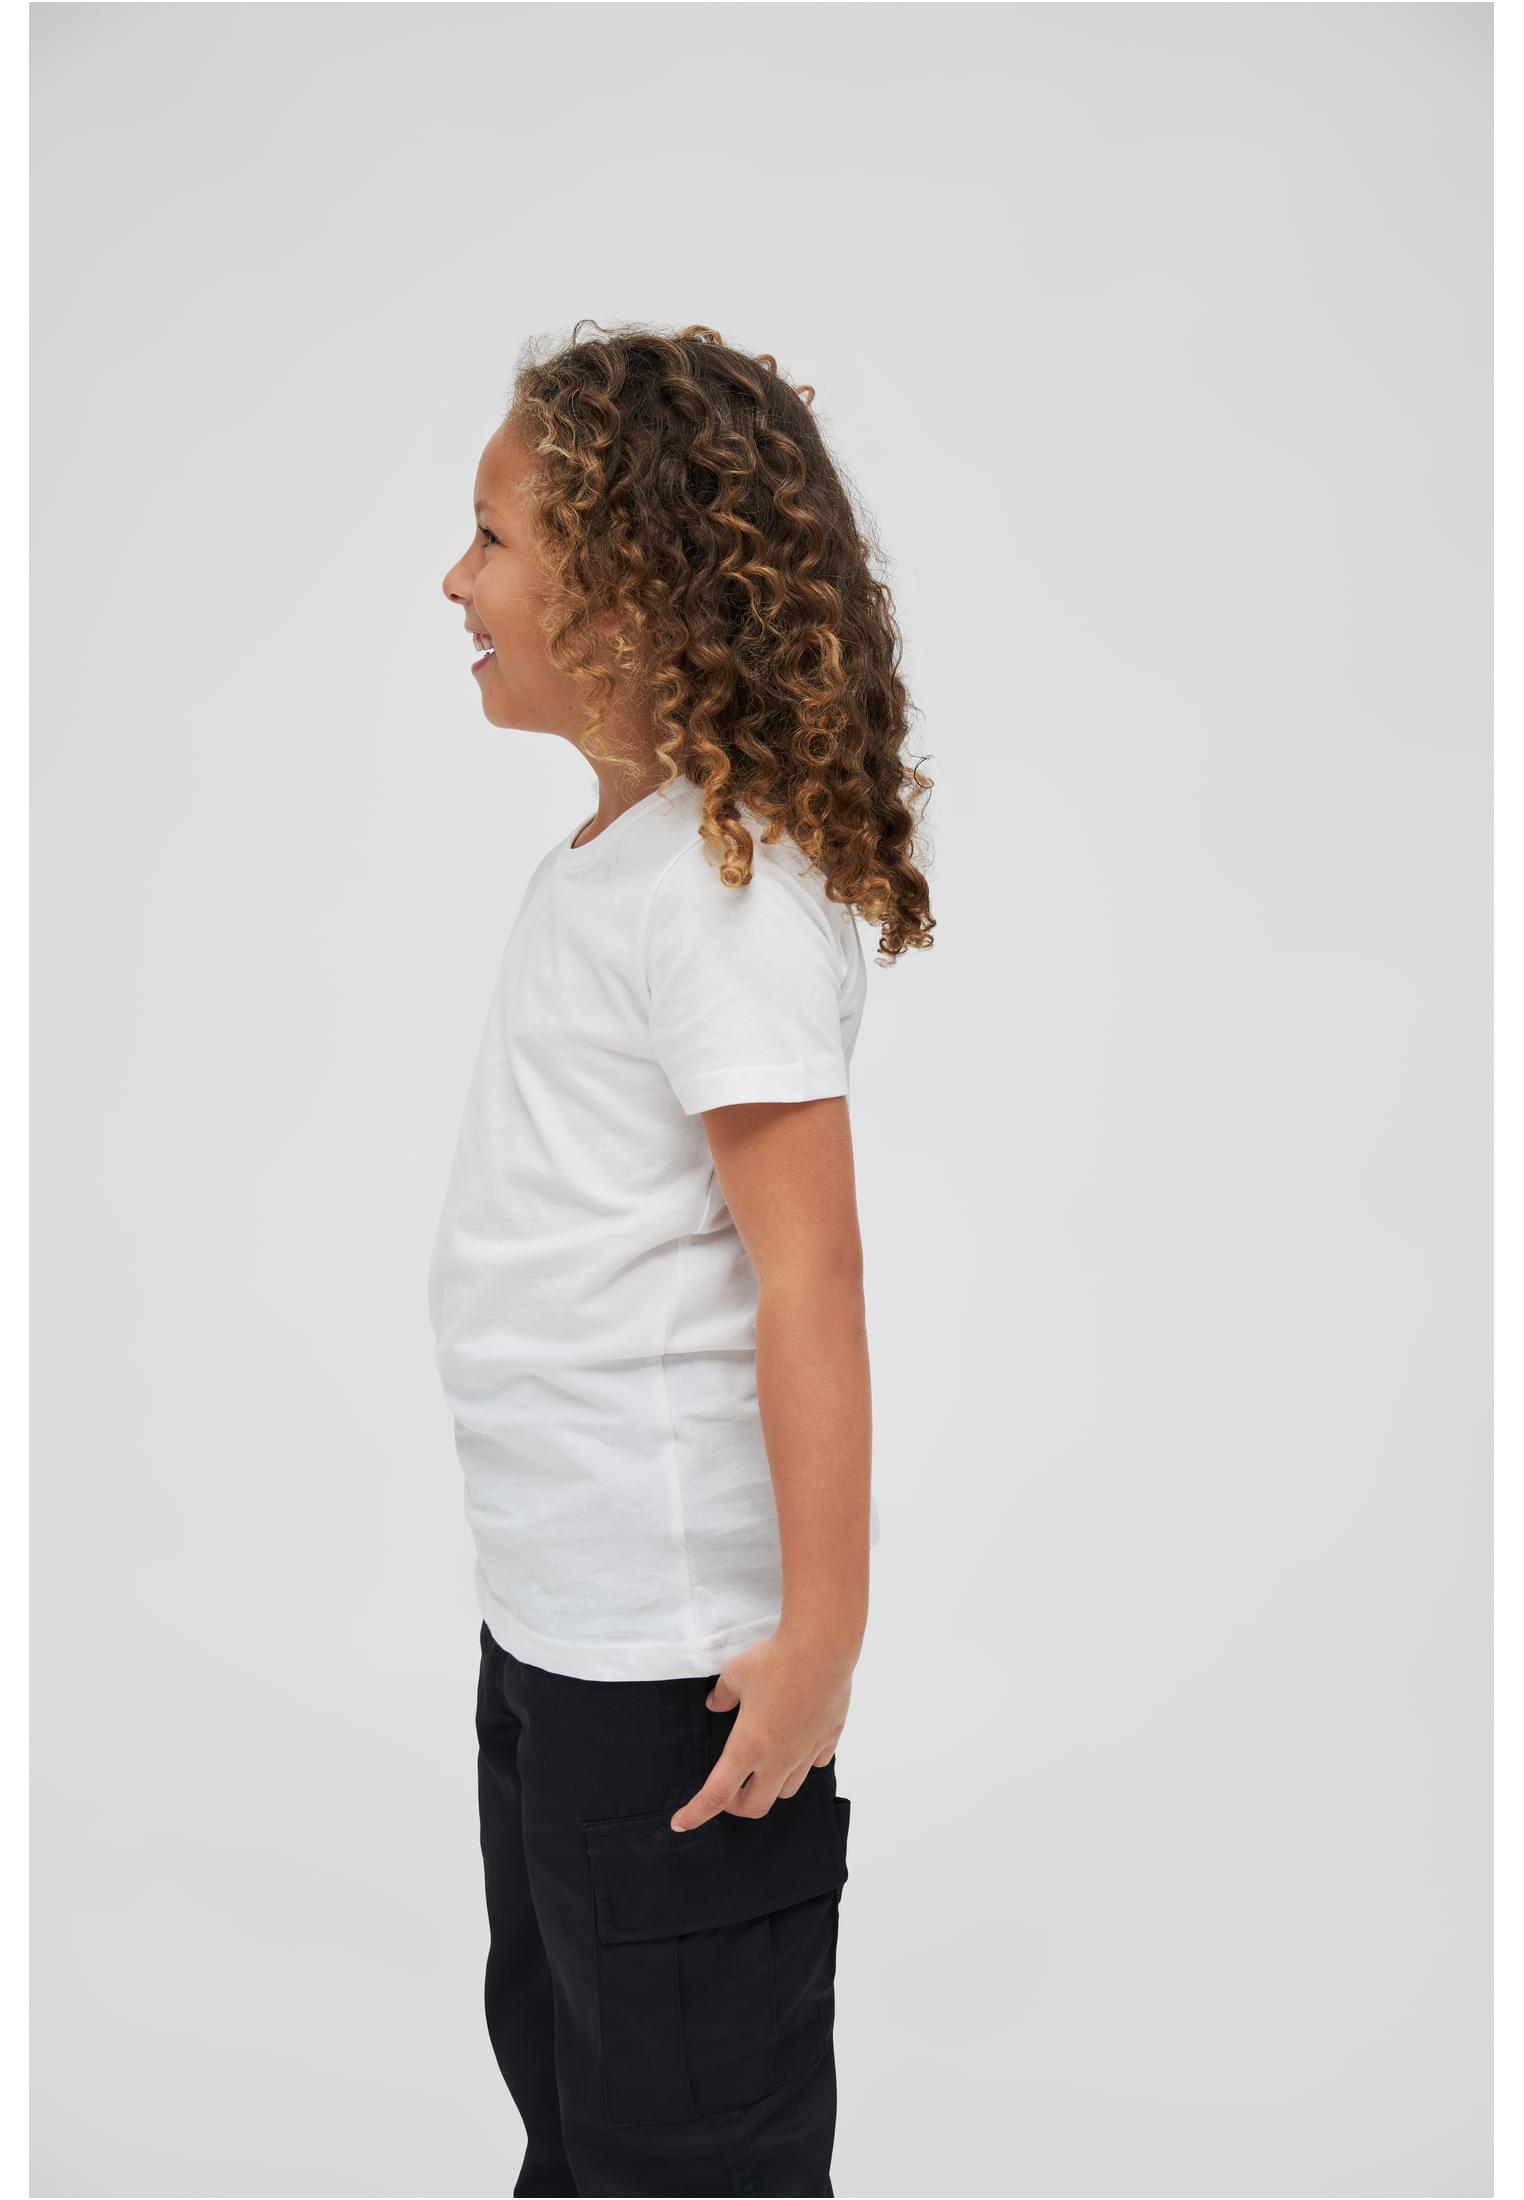 T-Shirts Kids T-Shirt in Farbe white